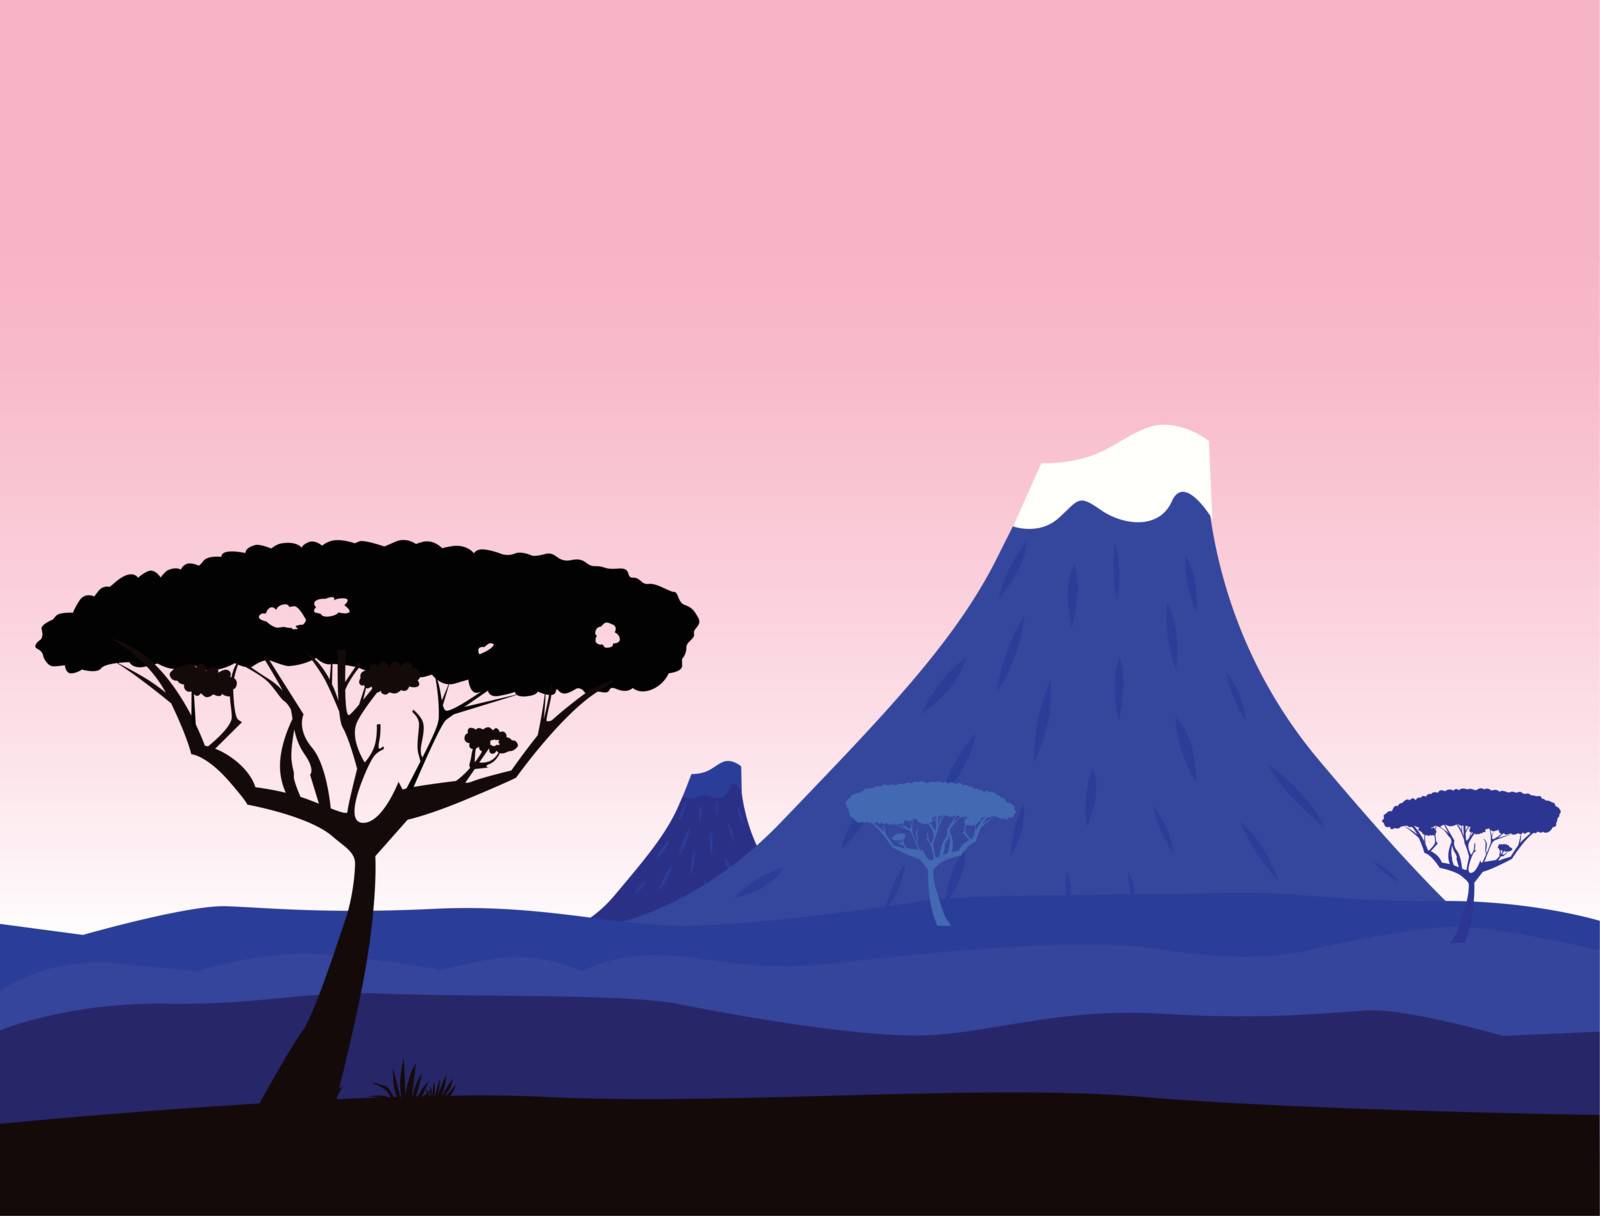 Dark blue african background. Volcano crater, trees silhouette and pink tranquil sky behind